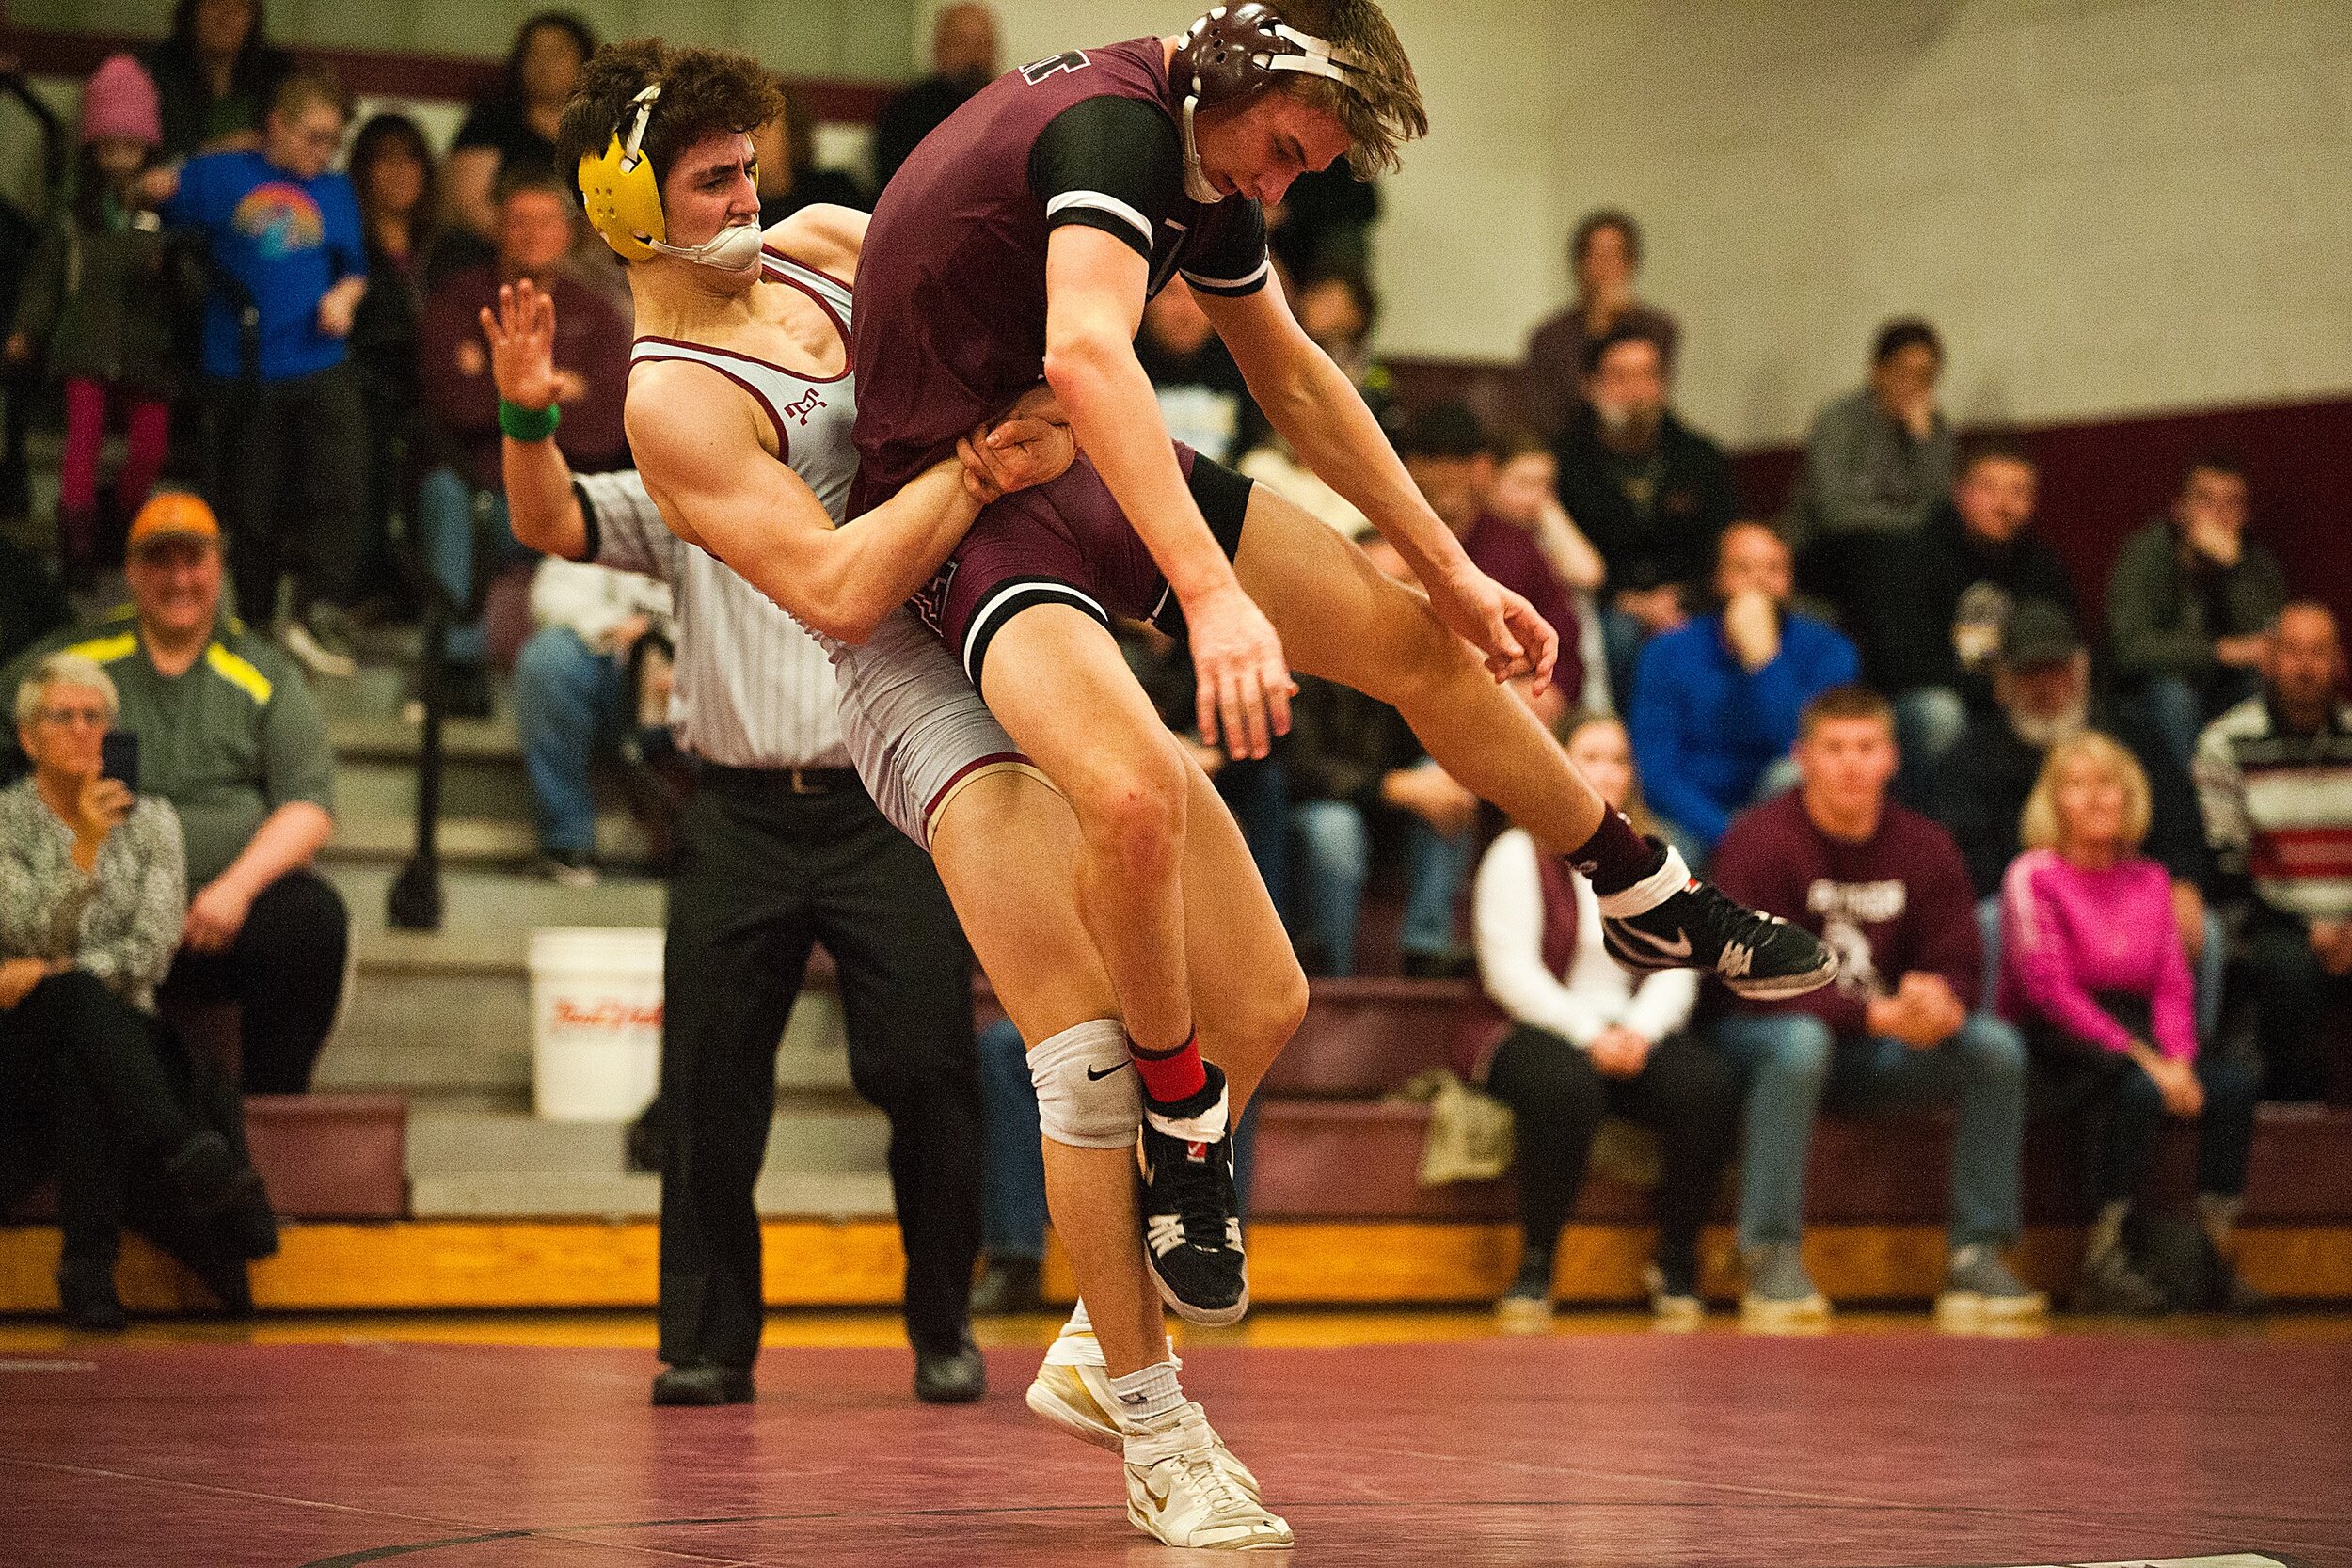  Ty Baxter of the LeRoy/Tri-Valley wrestling co-op lifts Tremont High School’s Cooper Wendling in their 170-pound match during the IHSA Class 1A Dual Team Sectional on Tuesday, Feb. 25, 2020, in LeRoy, Illinois. 